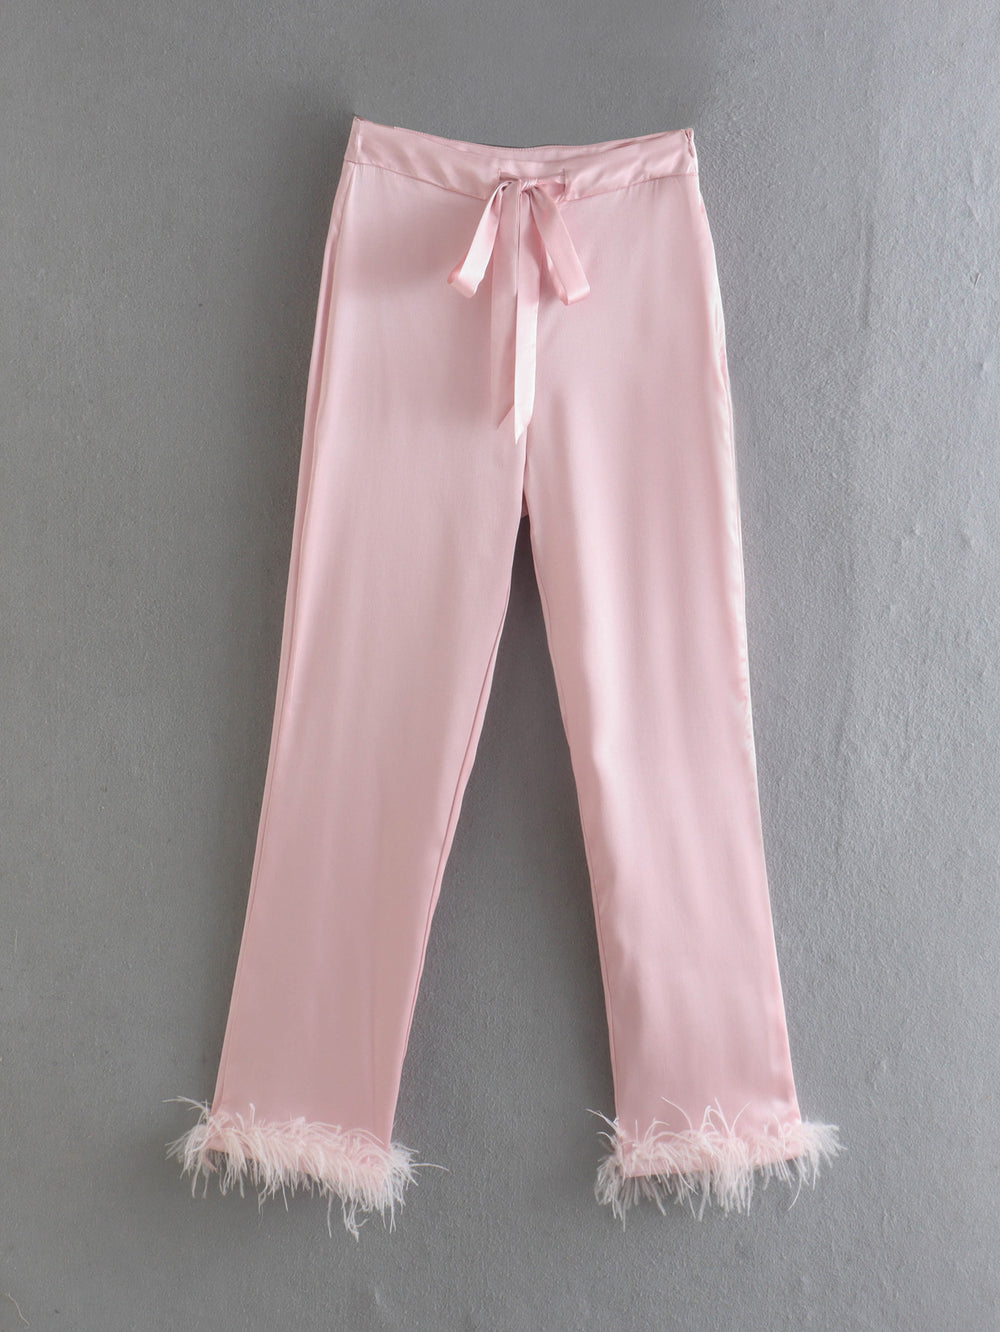 Women Clothing Summer Lace up Feather Decoration Casual Straight Pants Women  Trousers & TOP F00122614